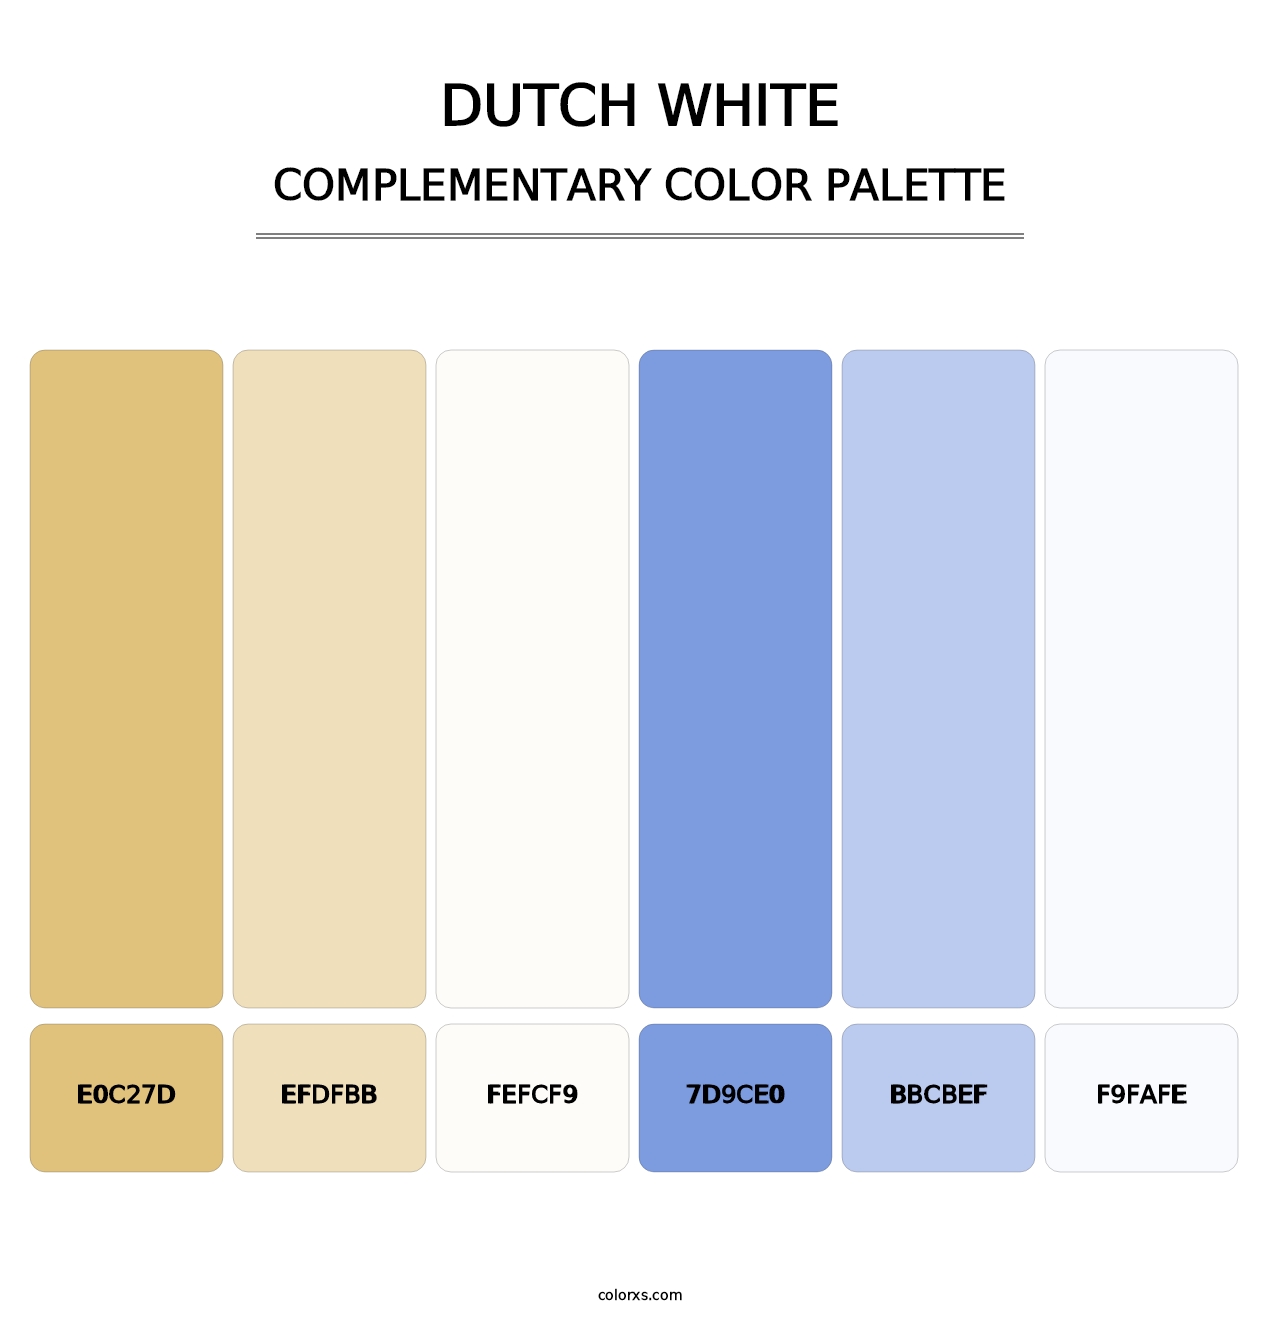 Dutch White - Complementary Color Palette